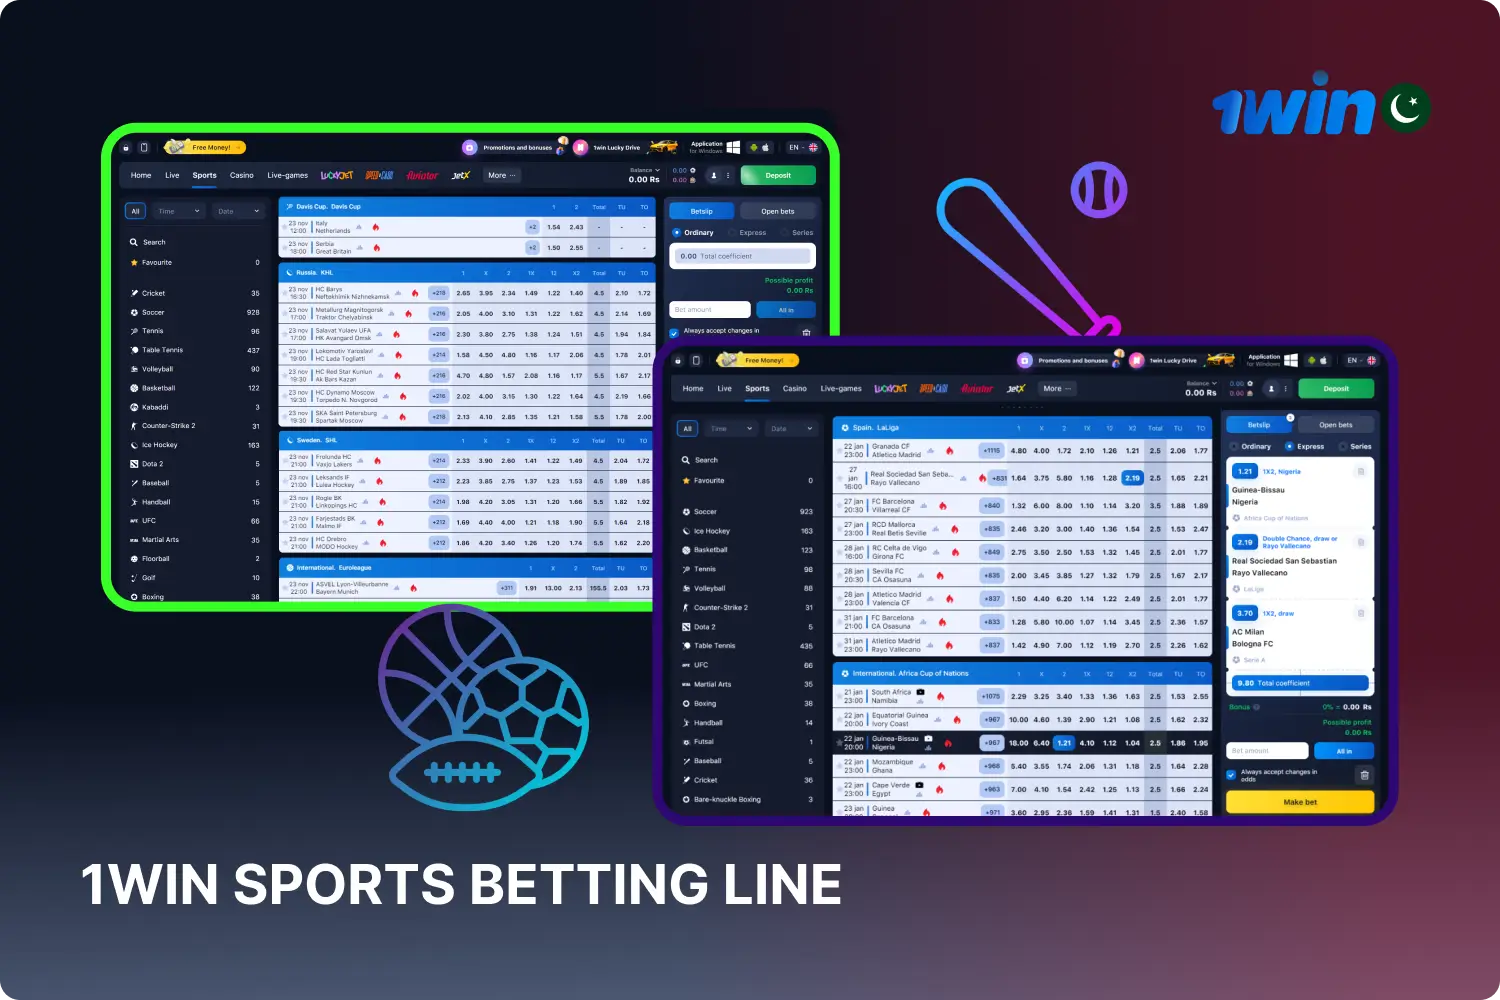 Sports bettors in Pakistan enjoy betting at 1win, with over 35 sports available and many popular sporting events to bet on